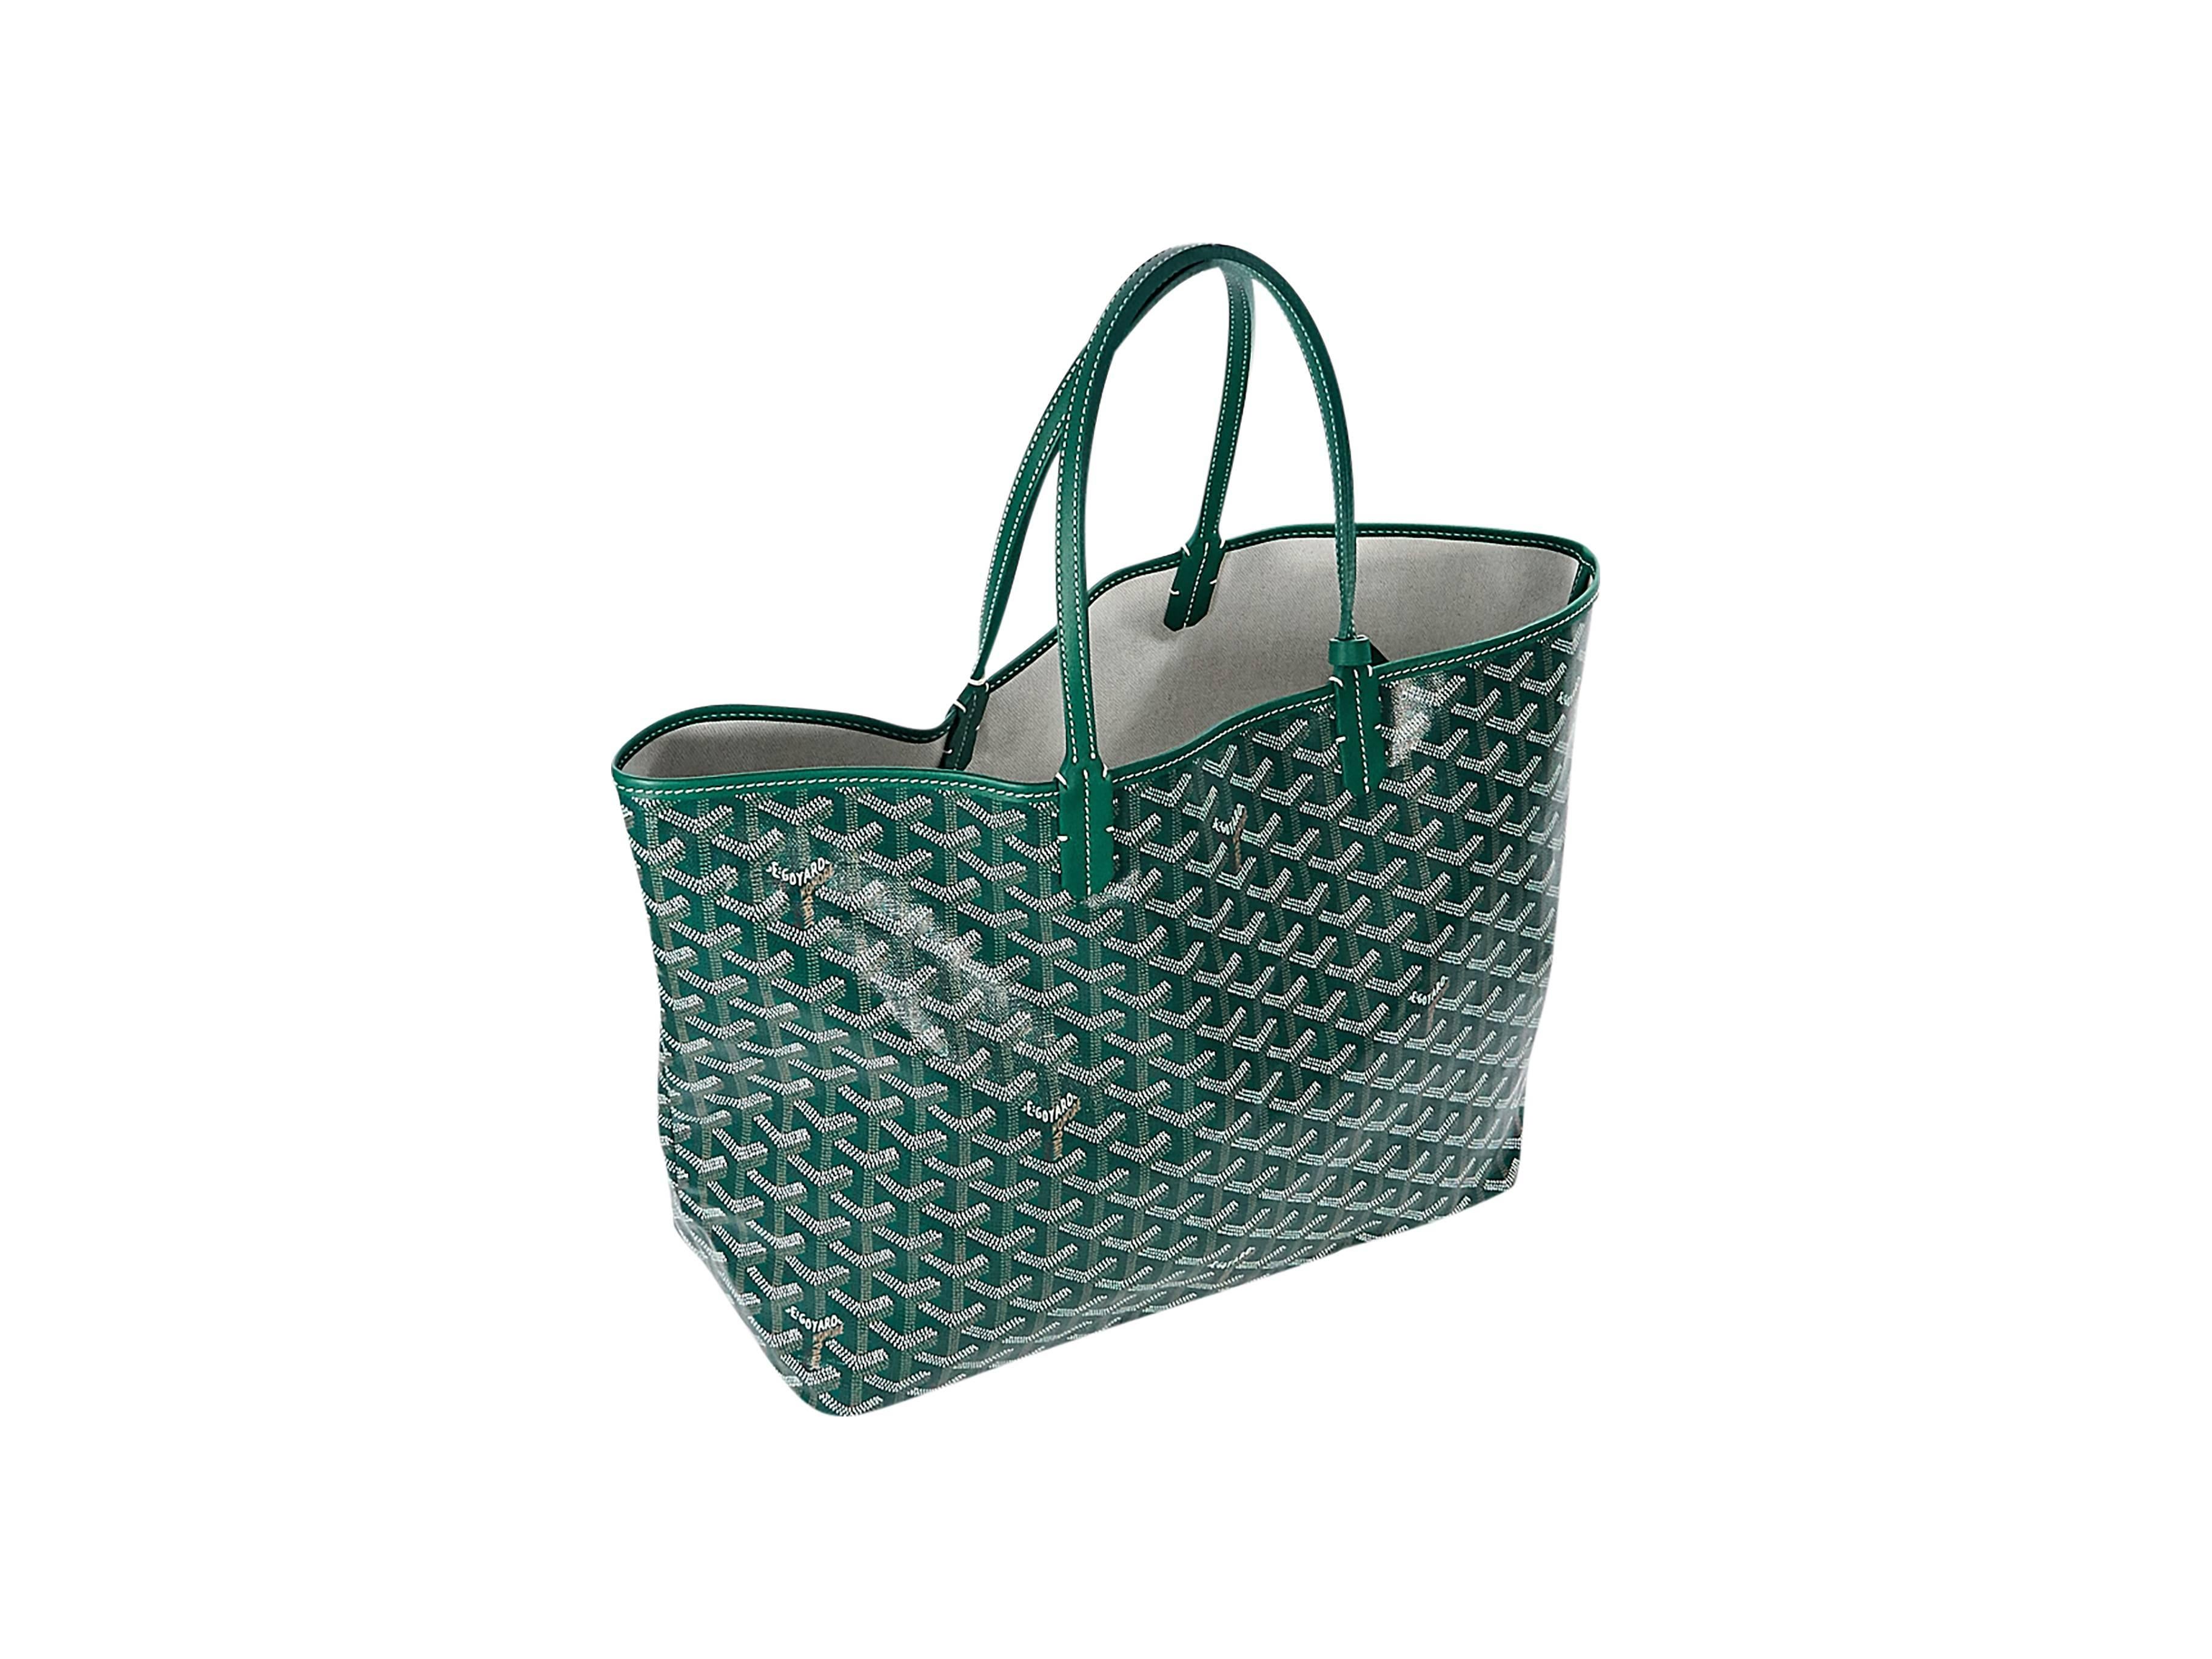 Product details:  Green St. Louis tote bag by Goyard.  Dual shoulder straps.  Open top.  Inner attached matching pouch.  Silvertone hardware.  10